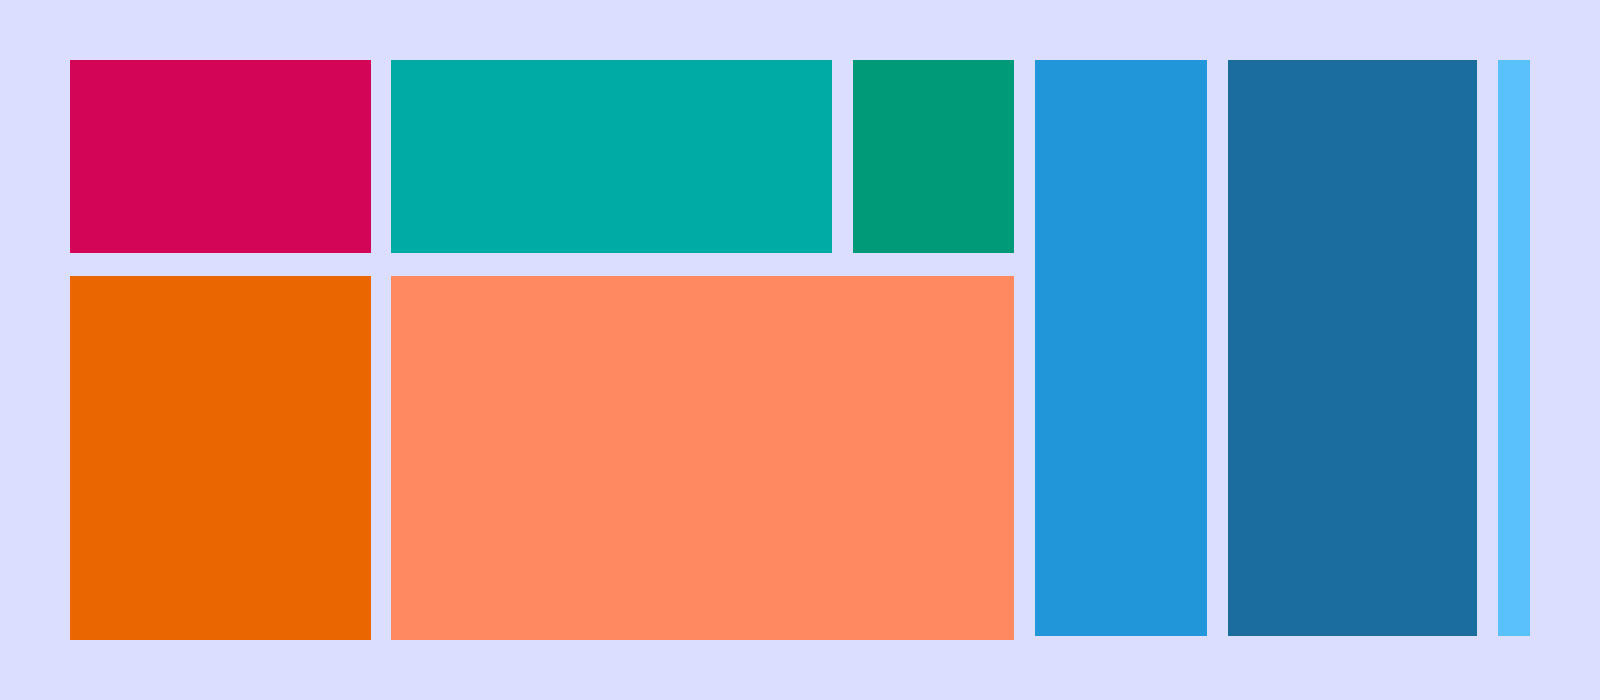 Css Grid Layout 